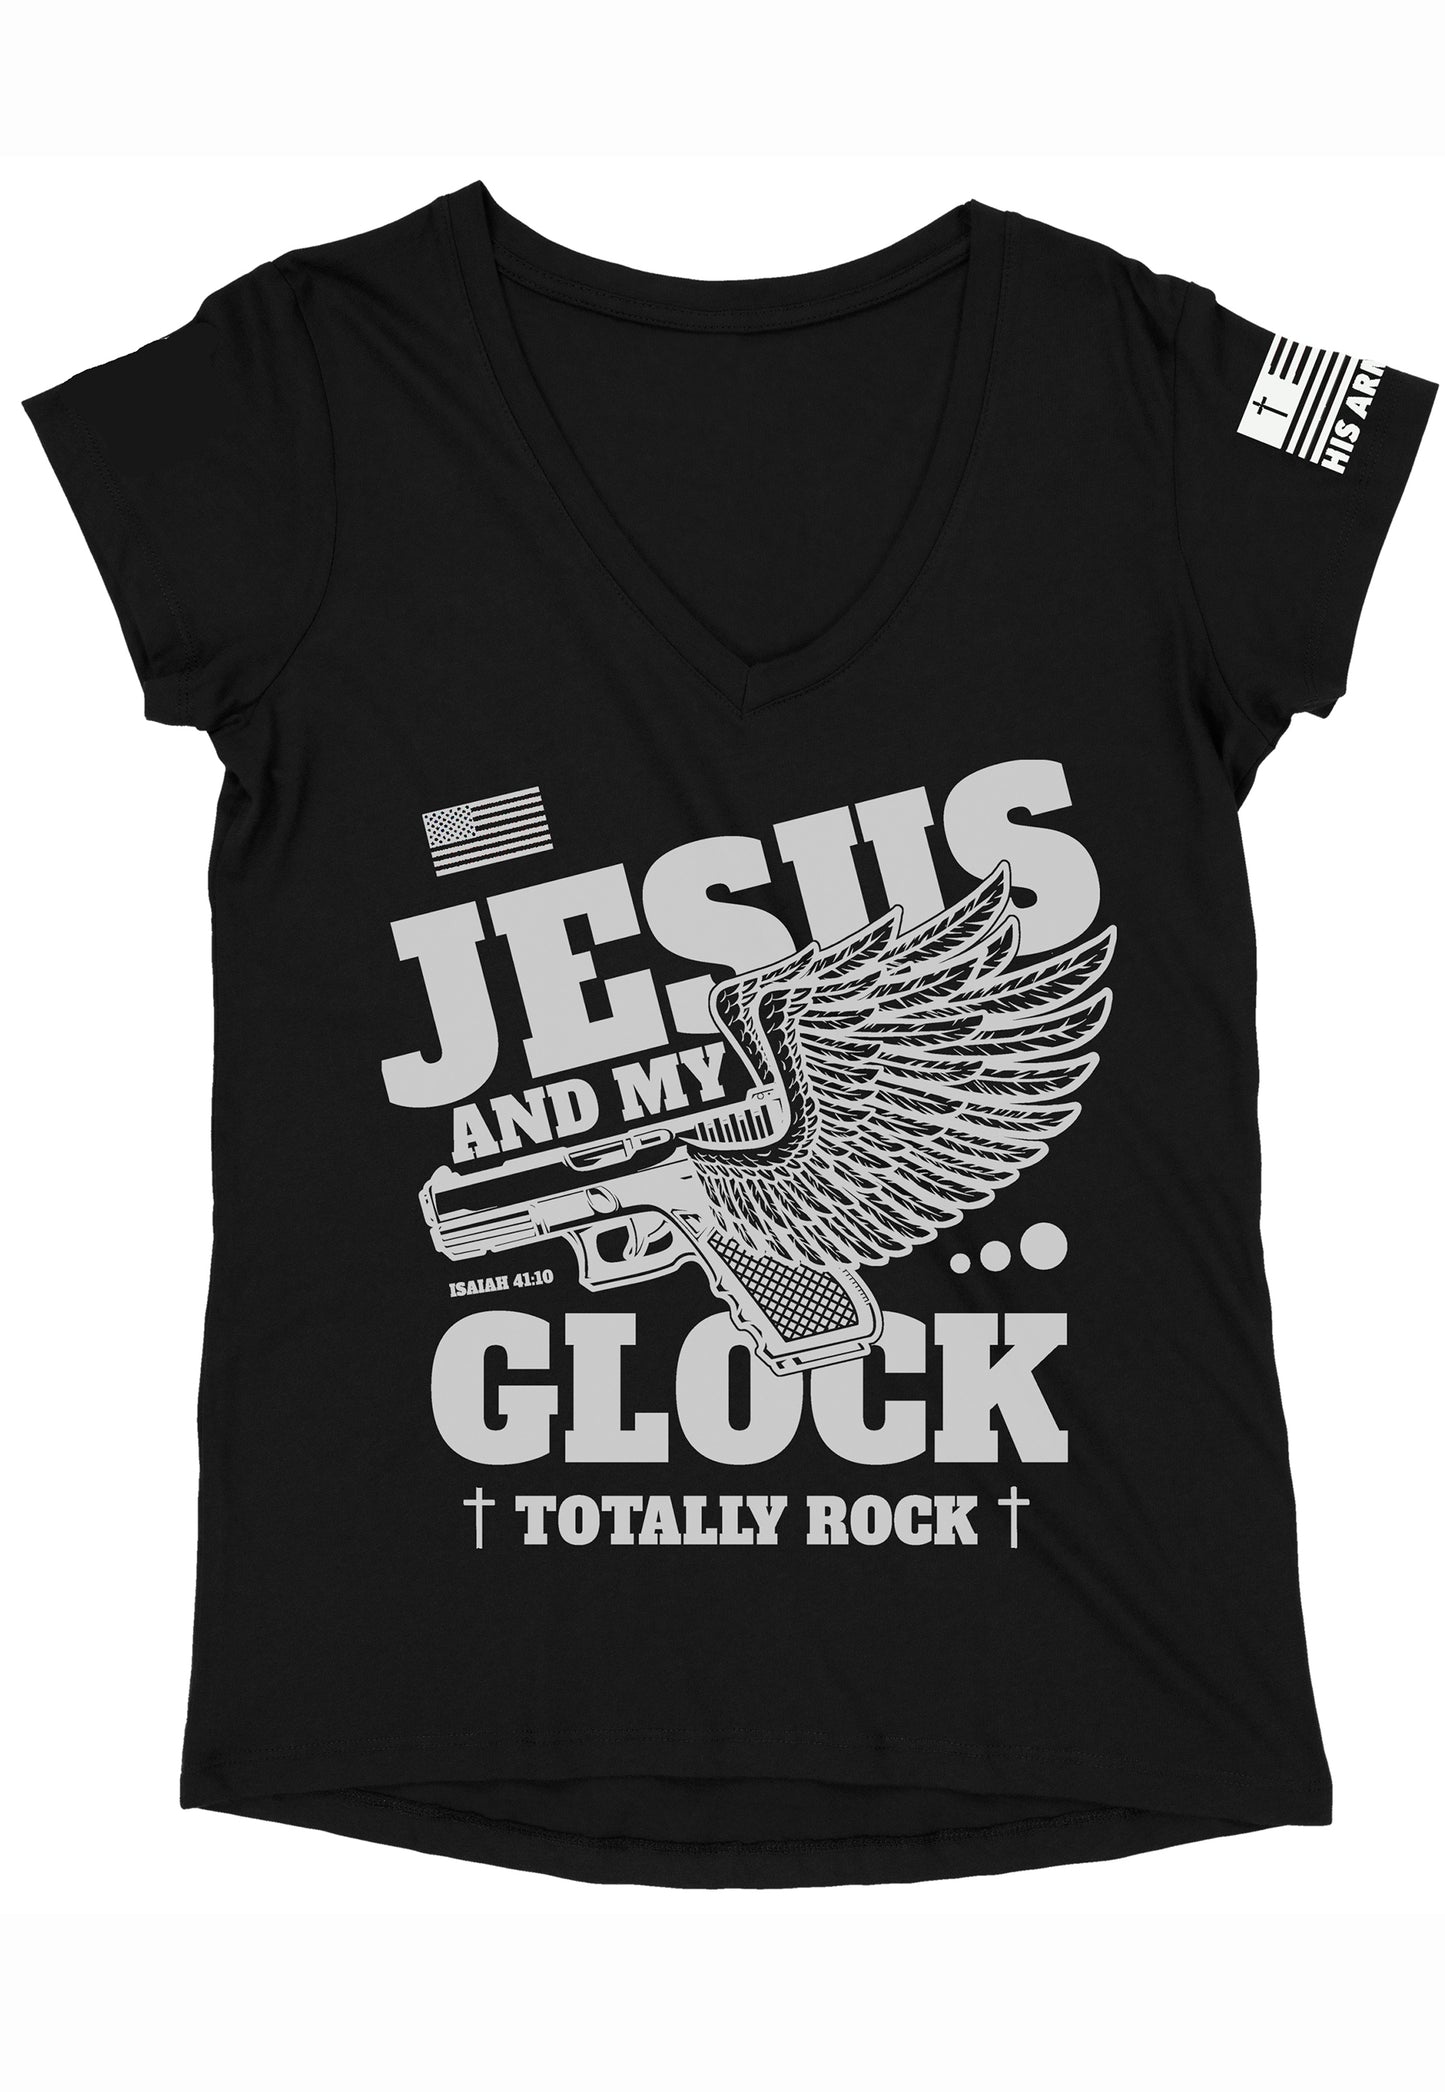 Jesus and My Glock Totally Rock t-shirt design 